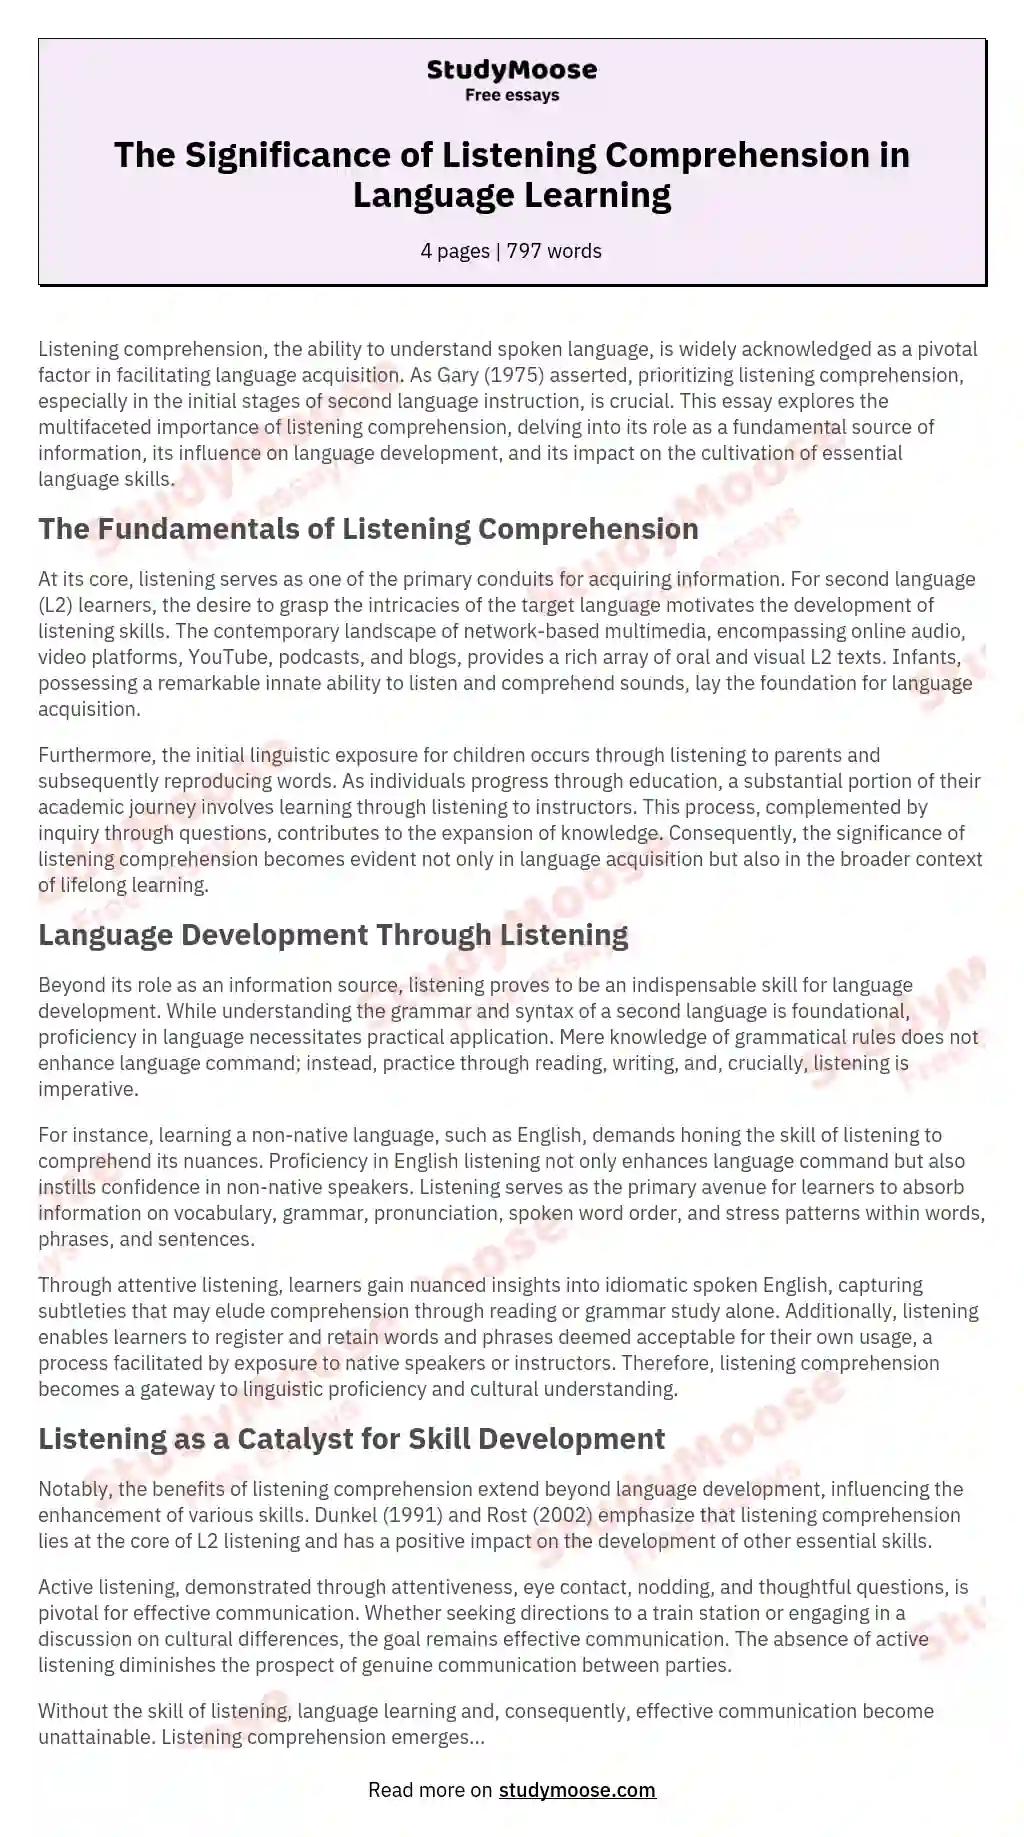 The Significance of Listening Comprehension in Language Learning essay